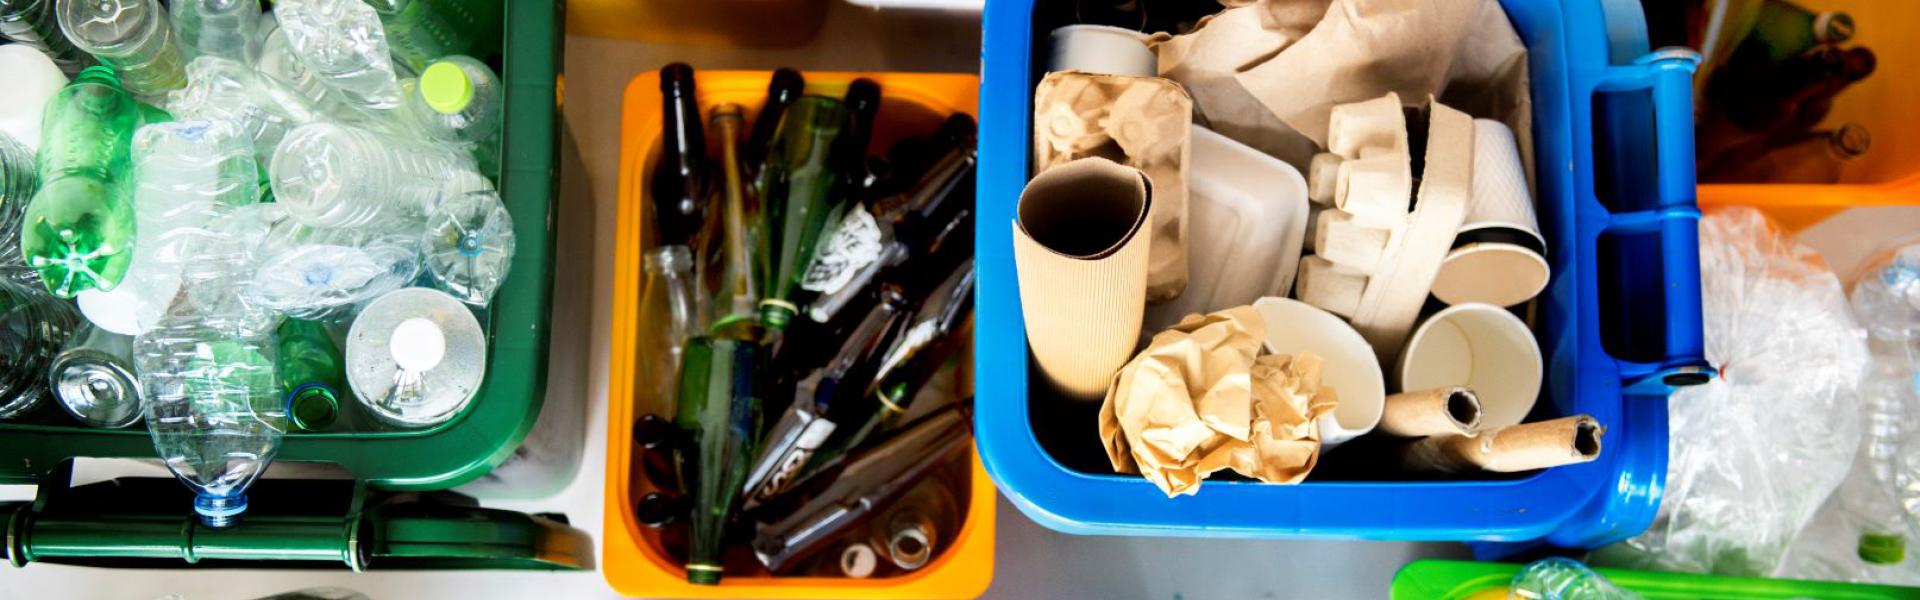 sorted recyclables